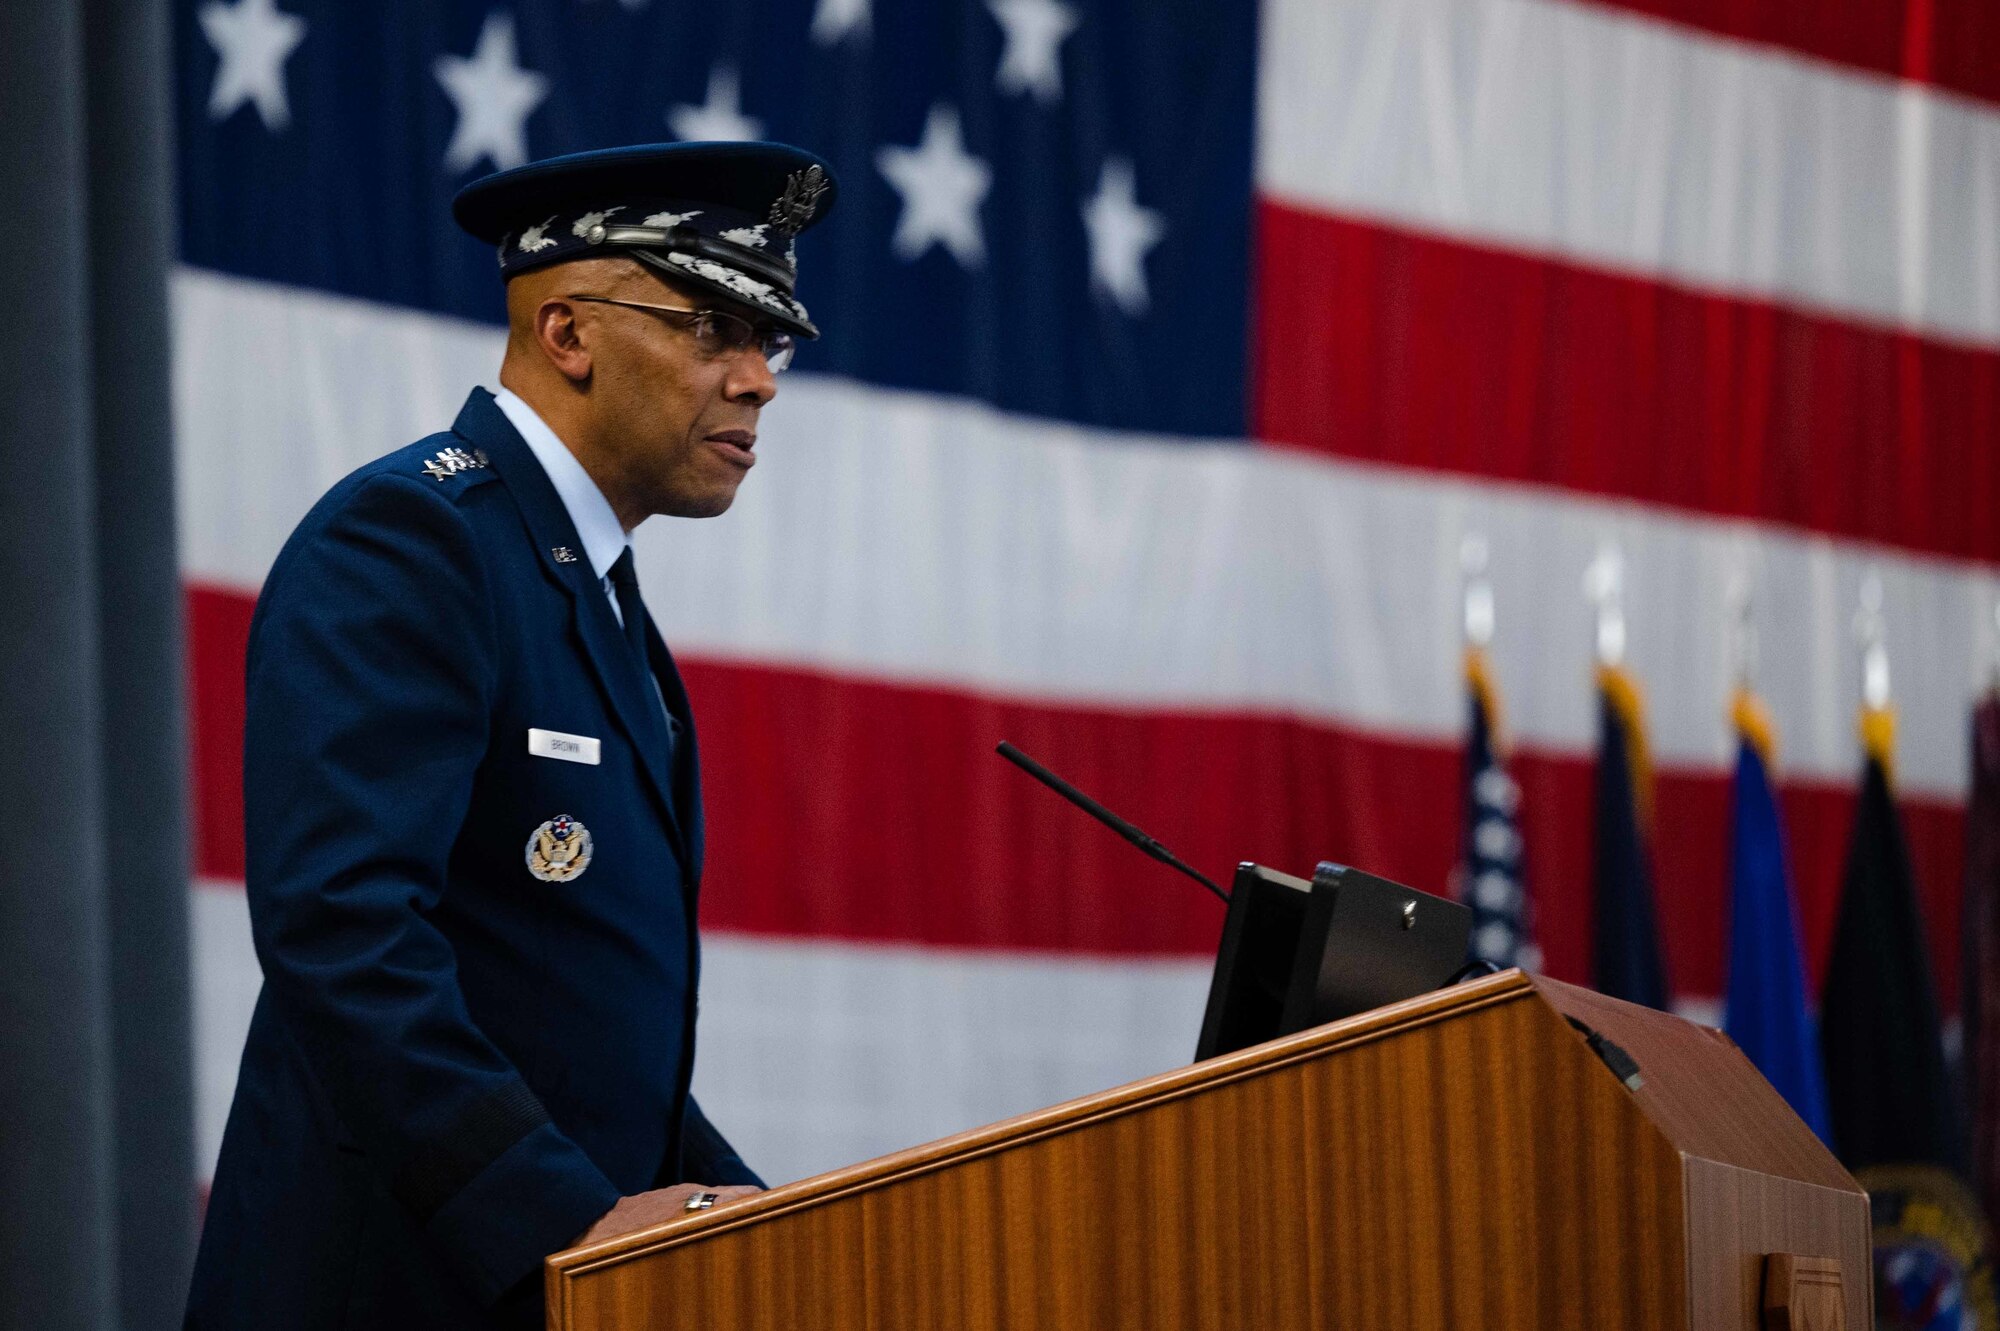 Air Force Chief of Staff Gen. CQ Brown, Jr. makes remarks during the Air Force Global Strike Command assumption of command ceremony at Barksdale Air Force Base, La., Dec. 7, 2022.